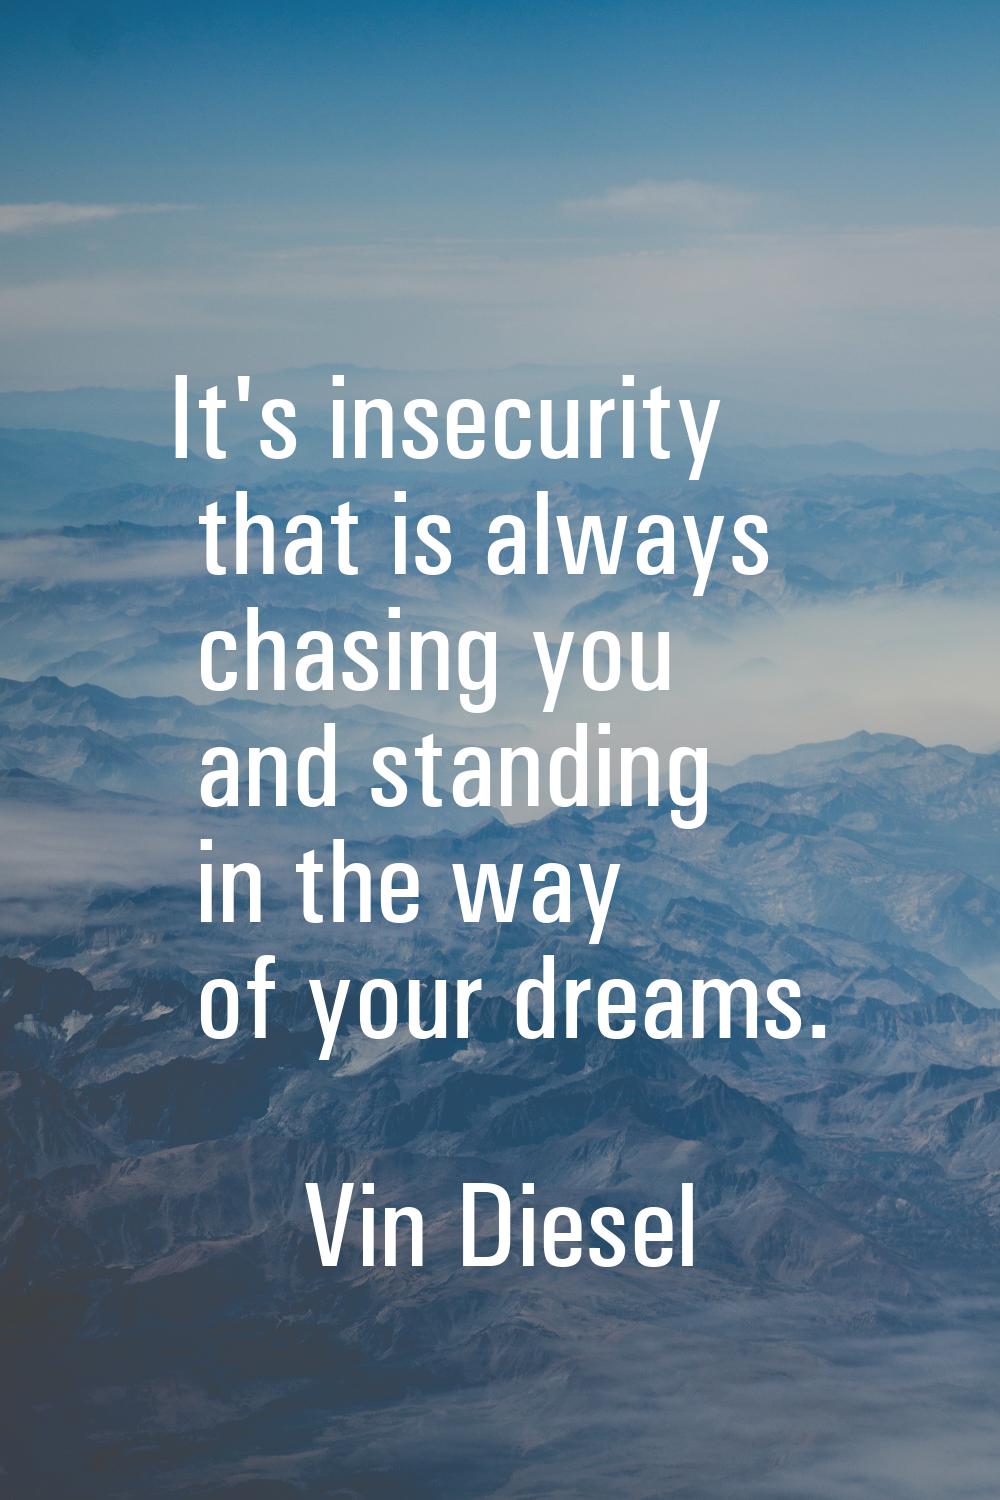 It's insecurity that is always chasing you and standing in the way of your dreams.